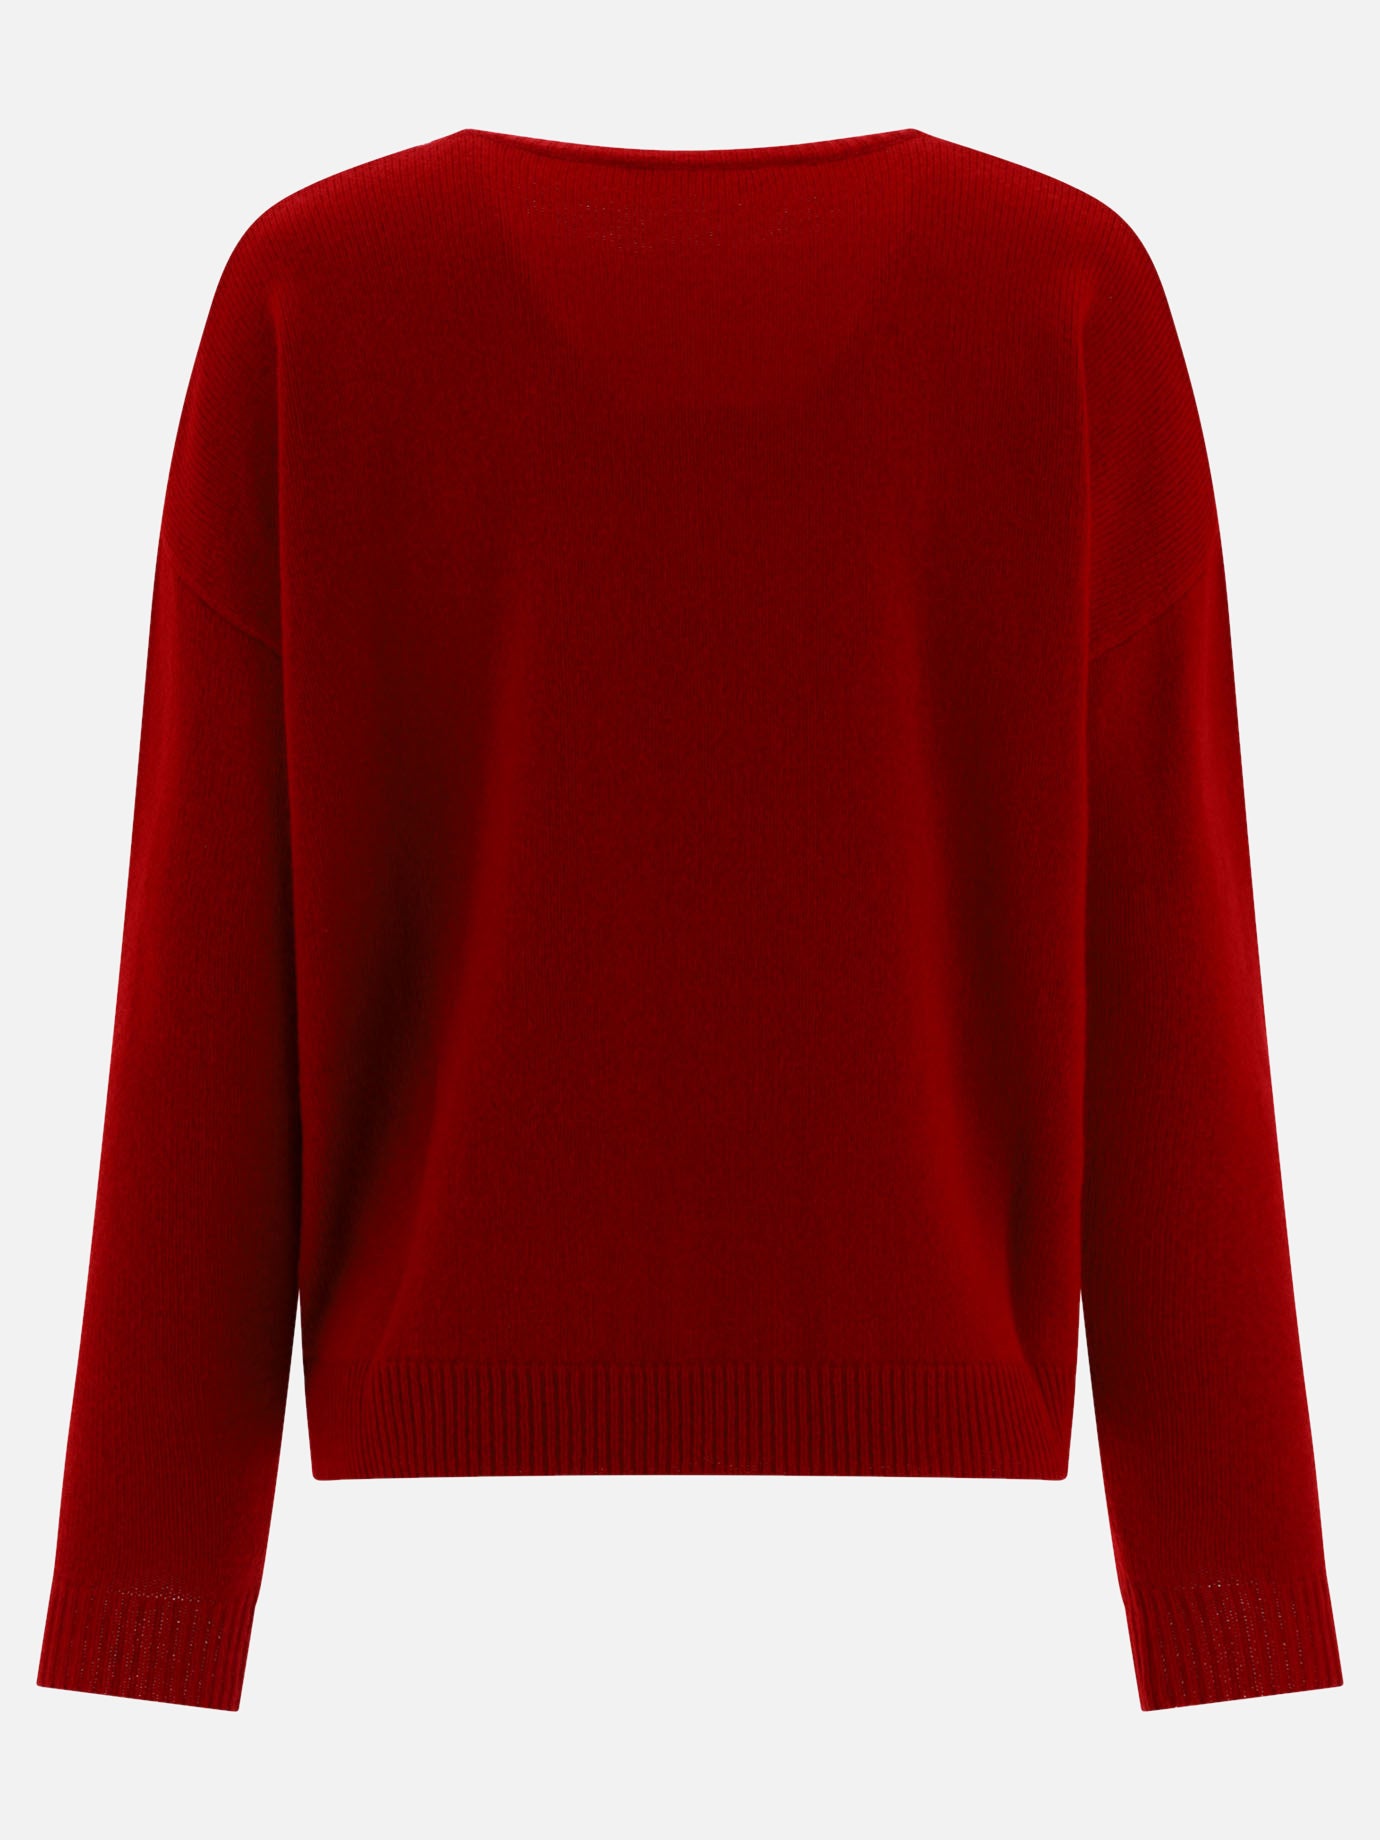 Wool and cashmere knit jumper